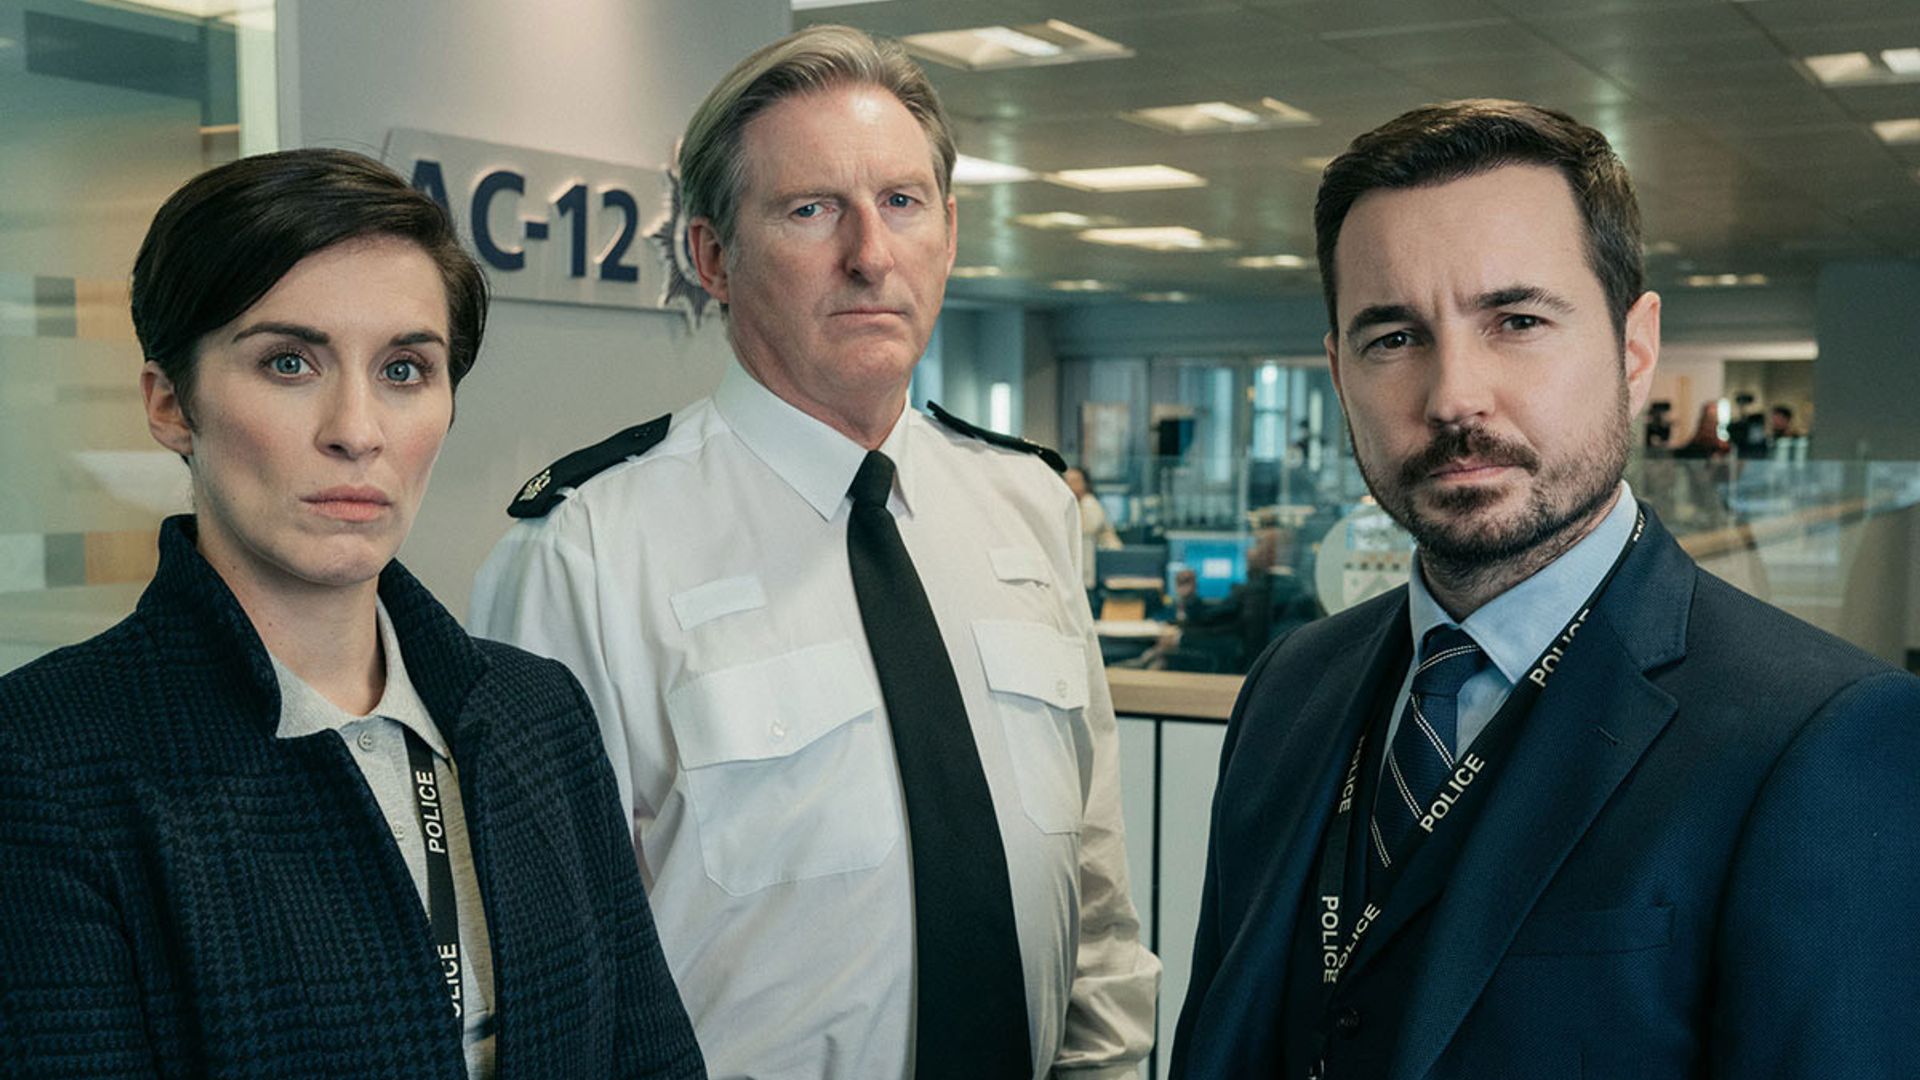 Line of Duty fans shocked after spotting major link between characters - did you notice? 